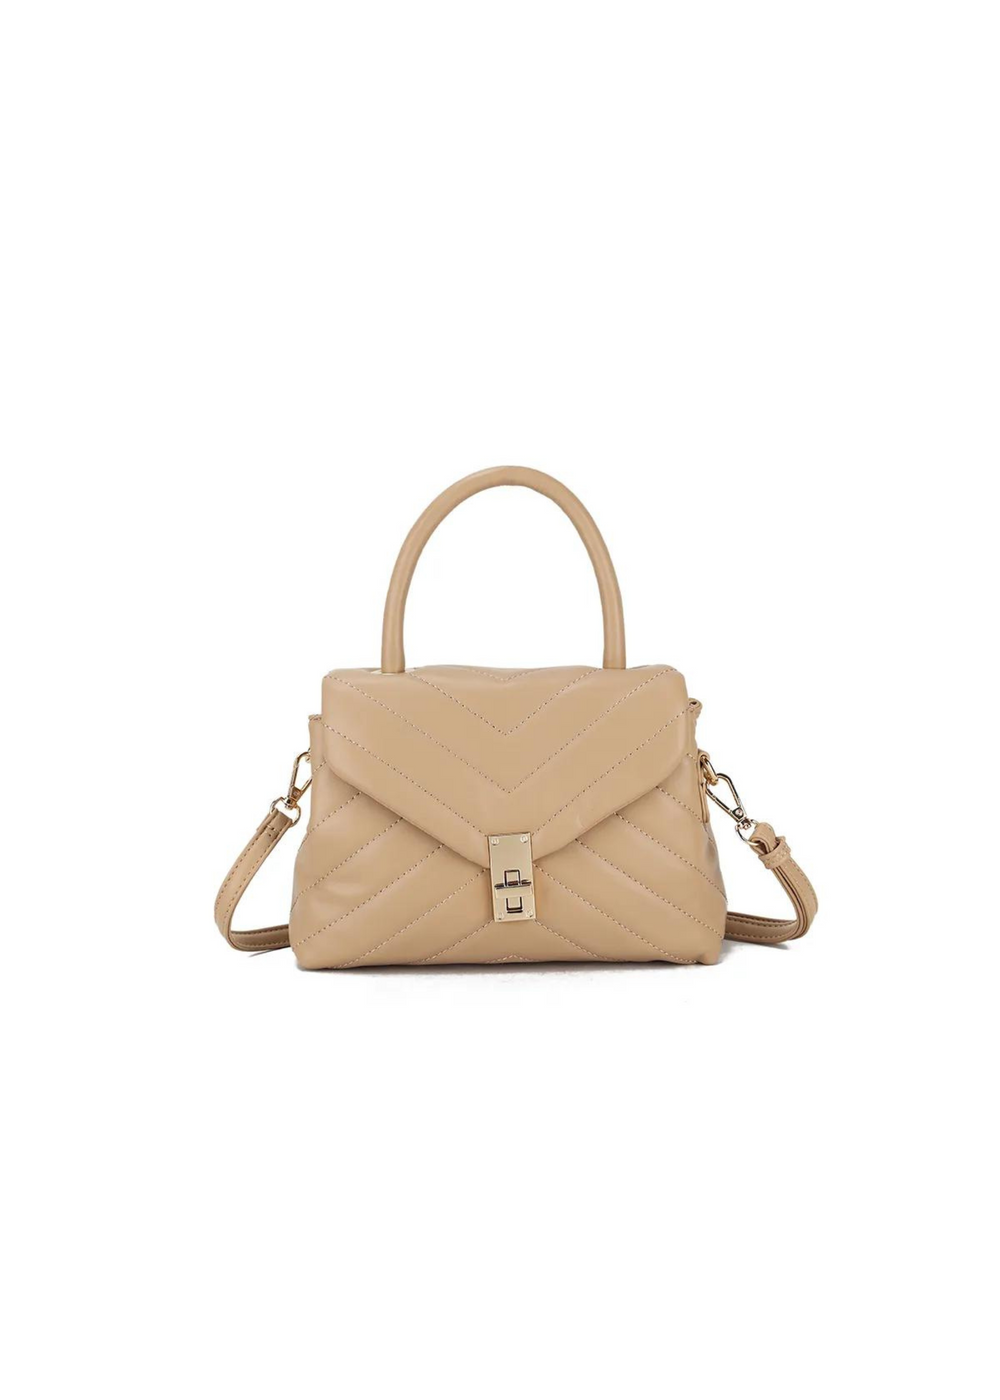 AURI TOP HANDLE BAG WITH BUCKLE DETAIL IN CAMEL FAUX LEATHER